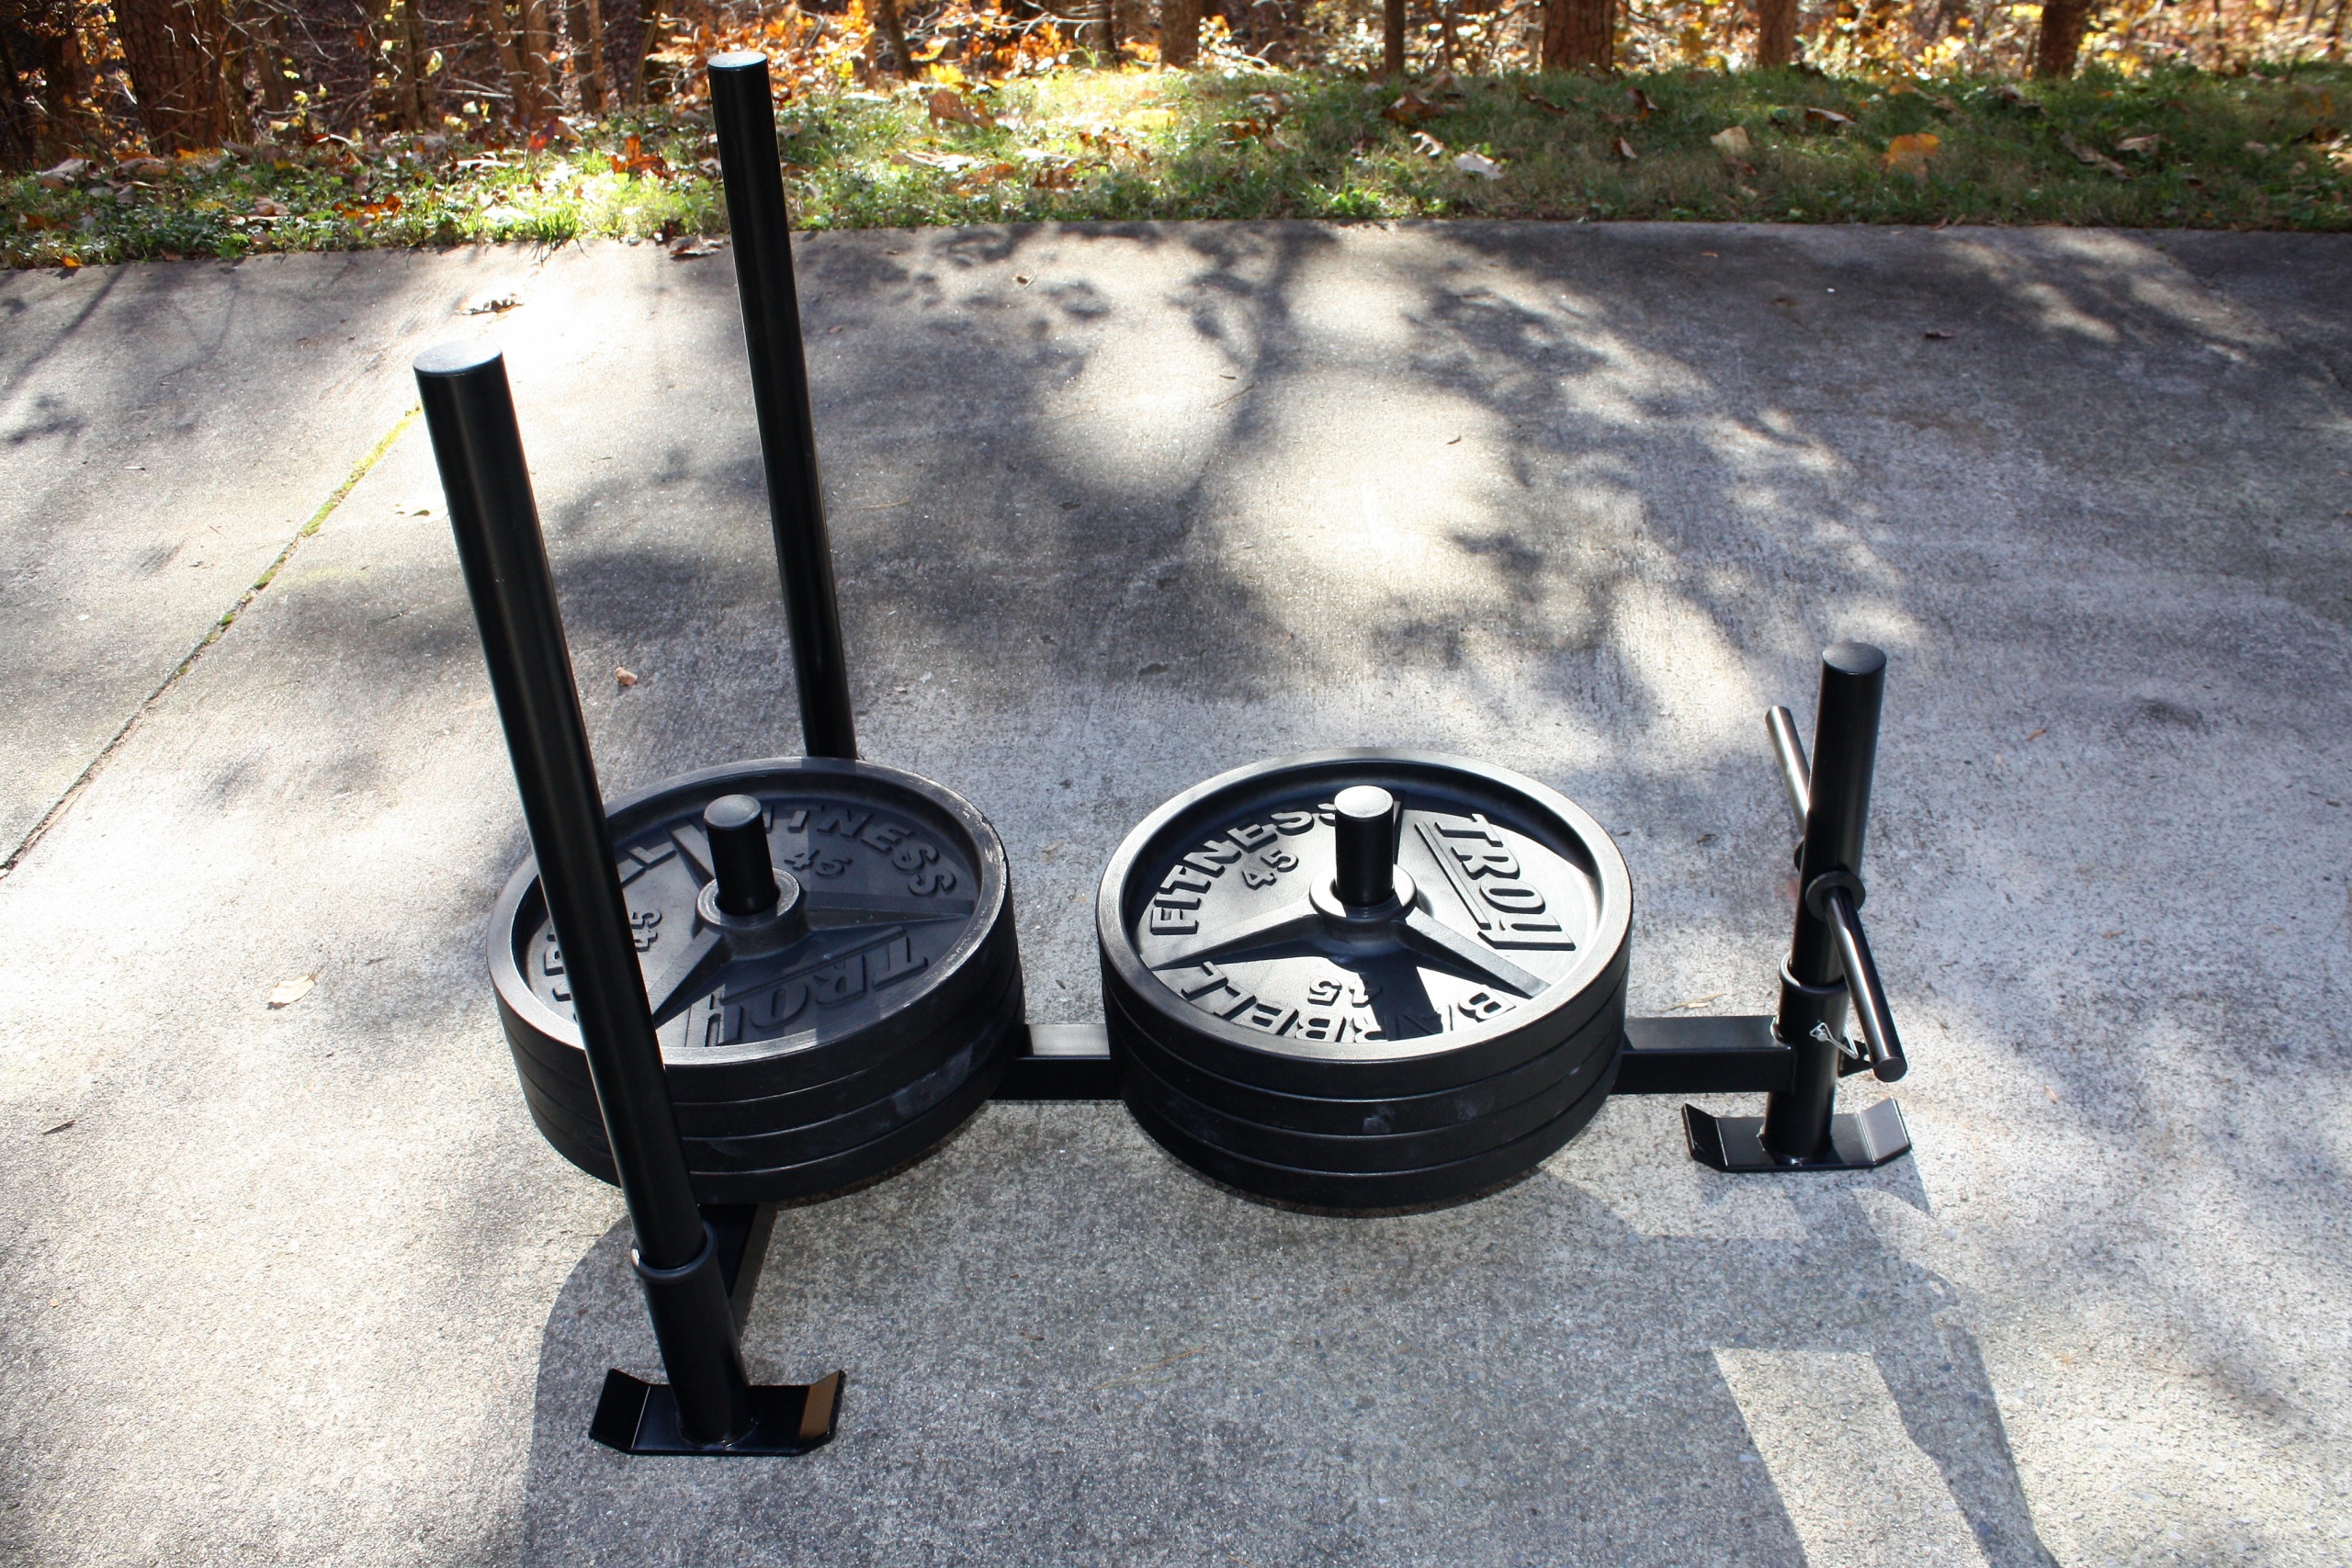 Fringe Sport Econ Prowler loaded with Troy weight plates